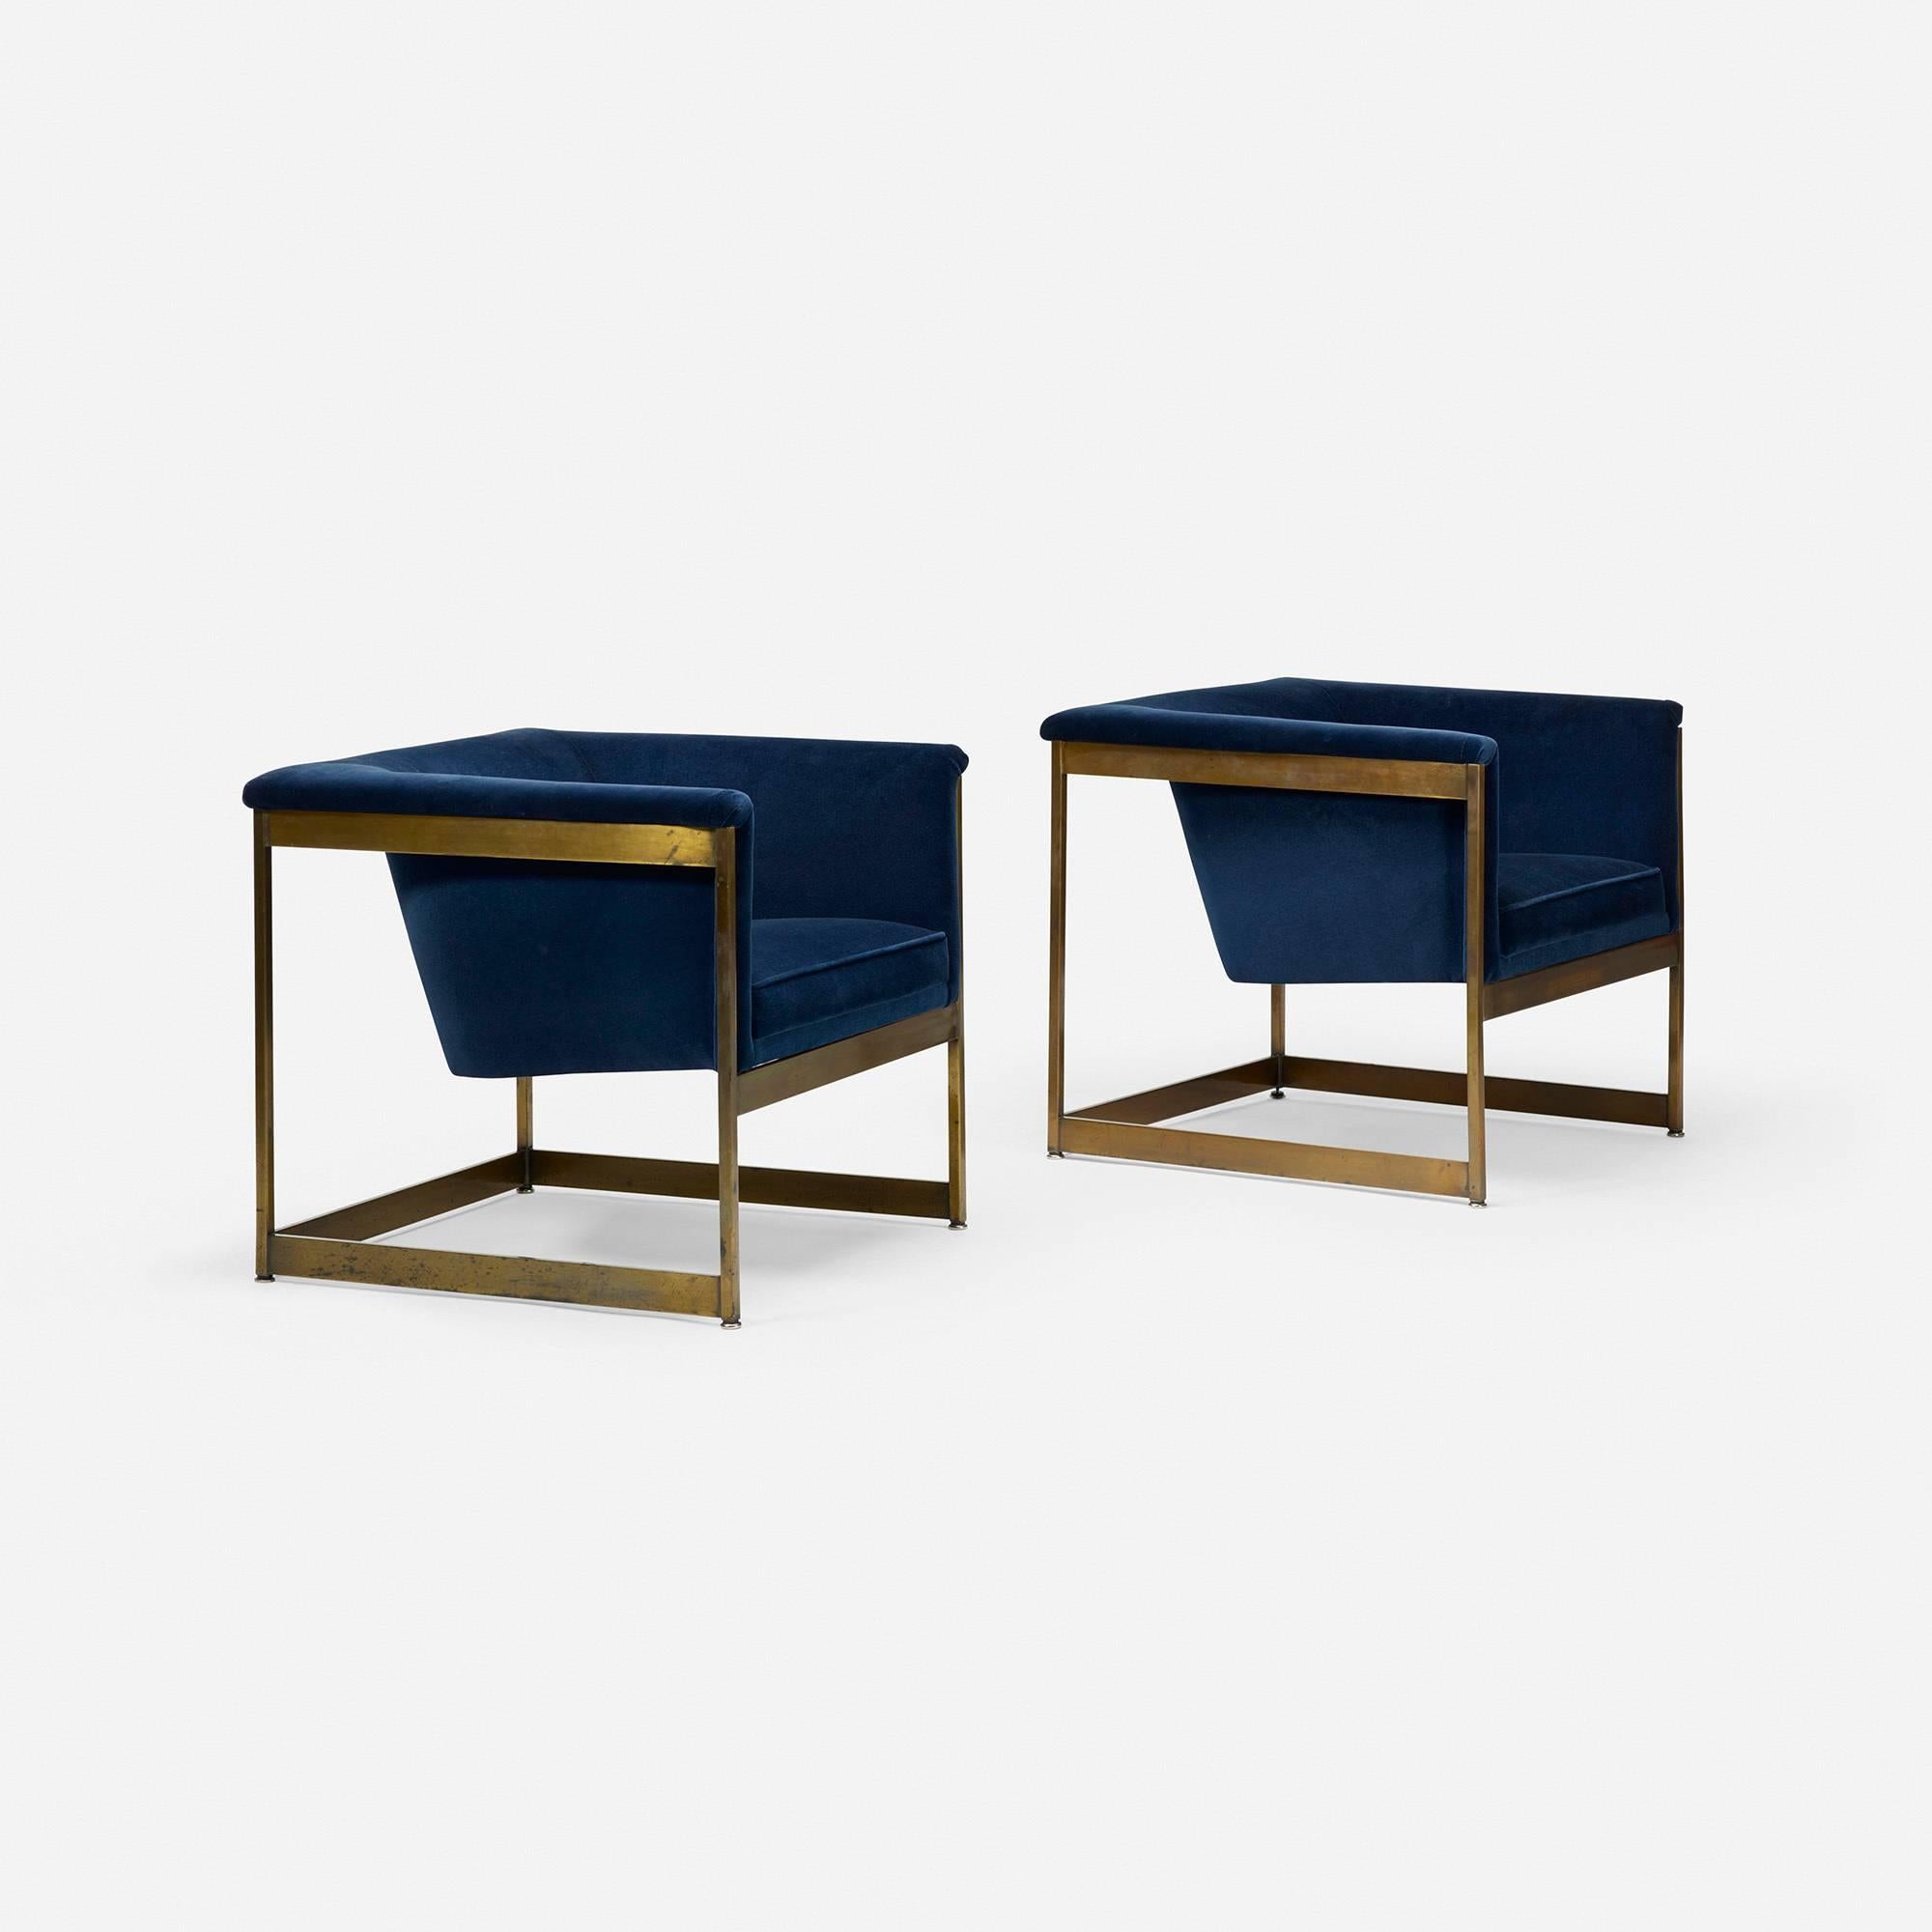 Stylish brass-coated lounge chairs by Milo Baughman. Recently reupholstered in a navy velvet fabric.